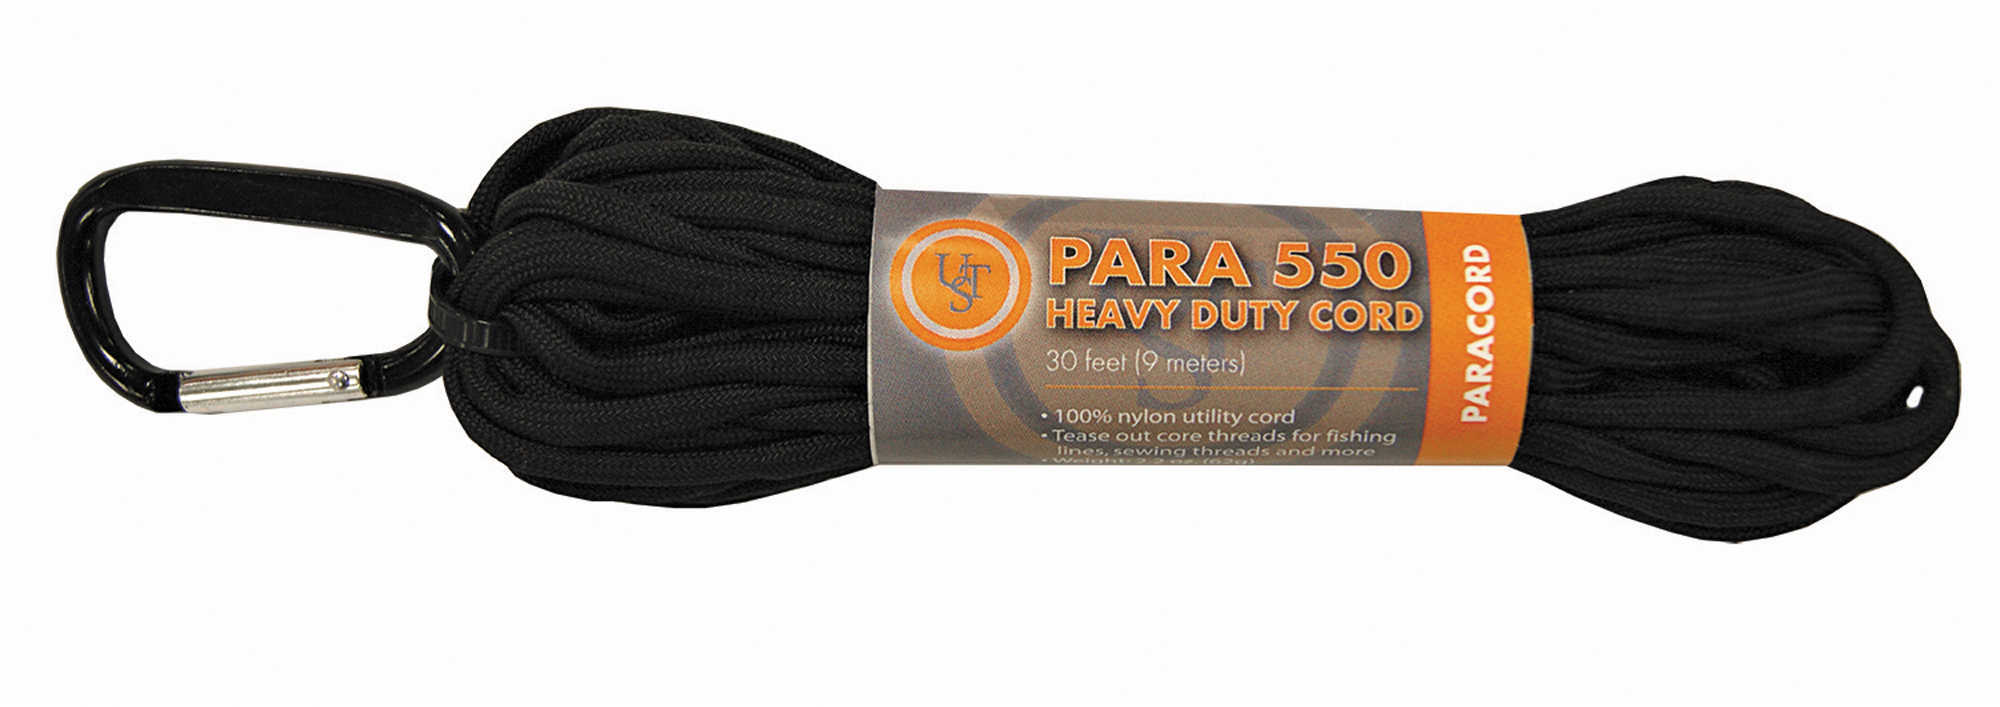 Ultimate Survival Technologies Paracord 550 30' Hank Black Md: 20-5X30-20